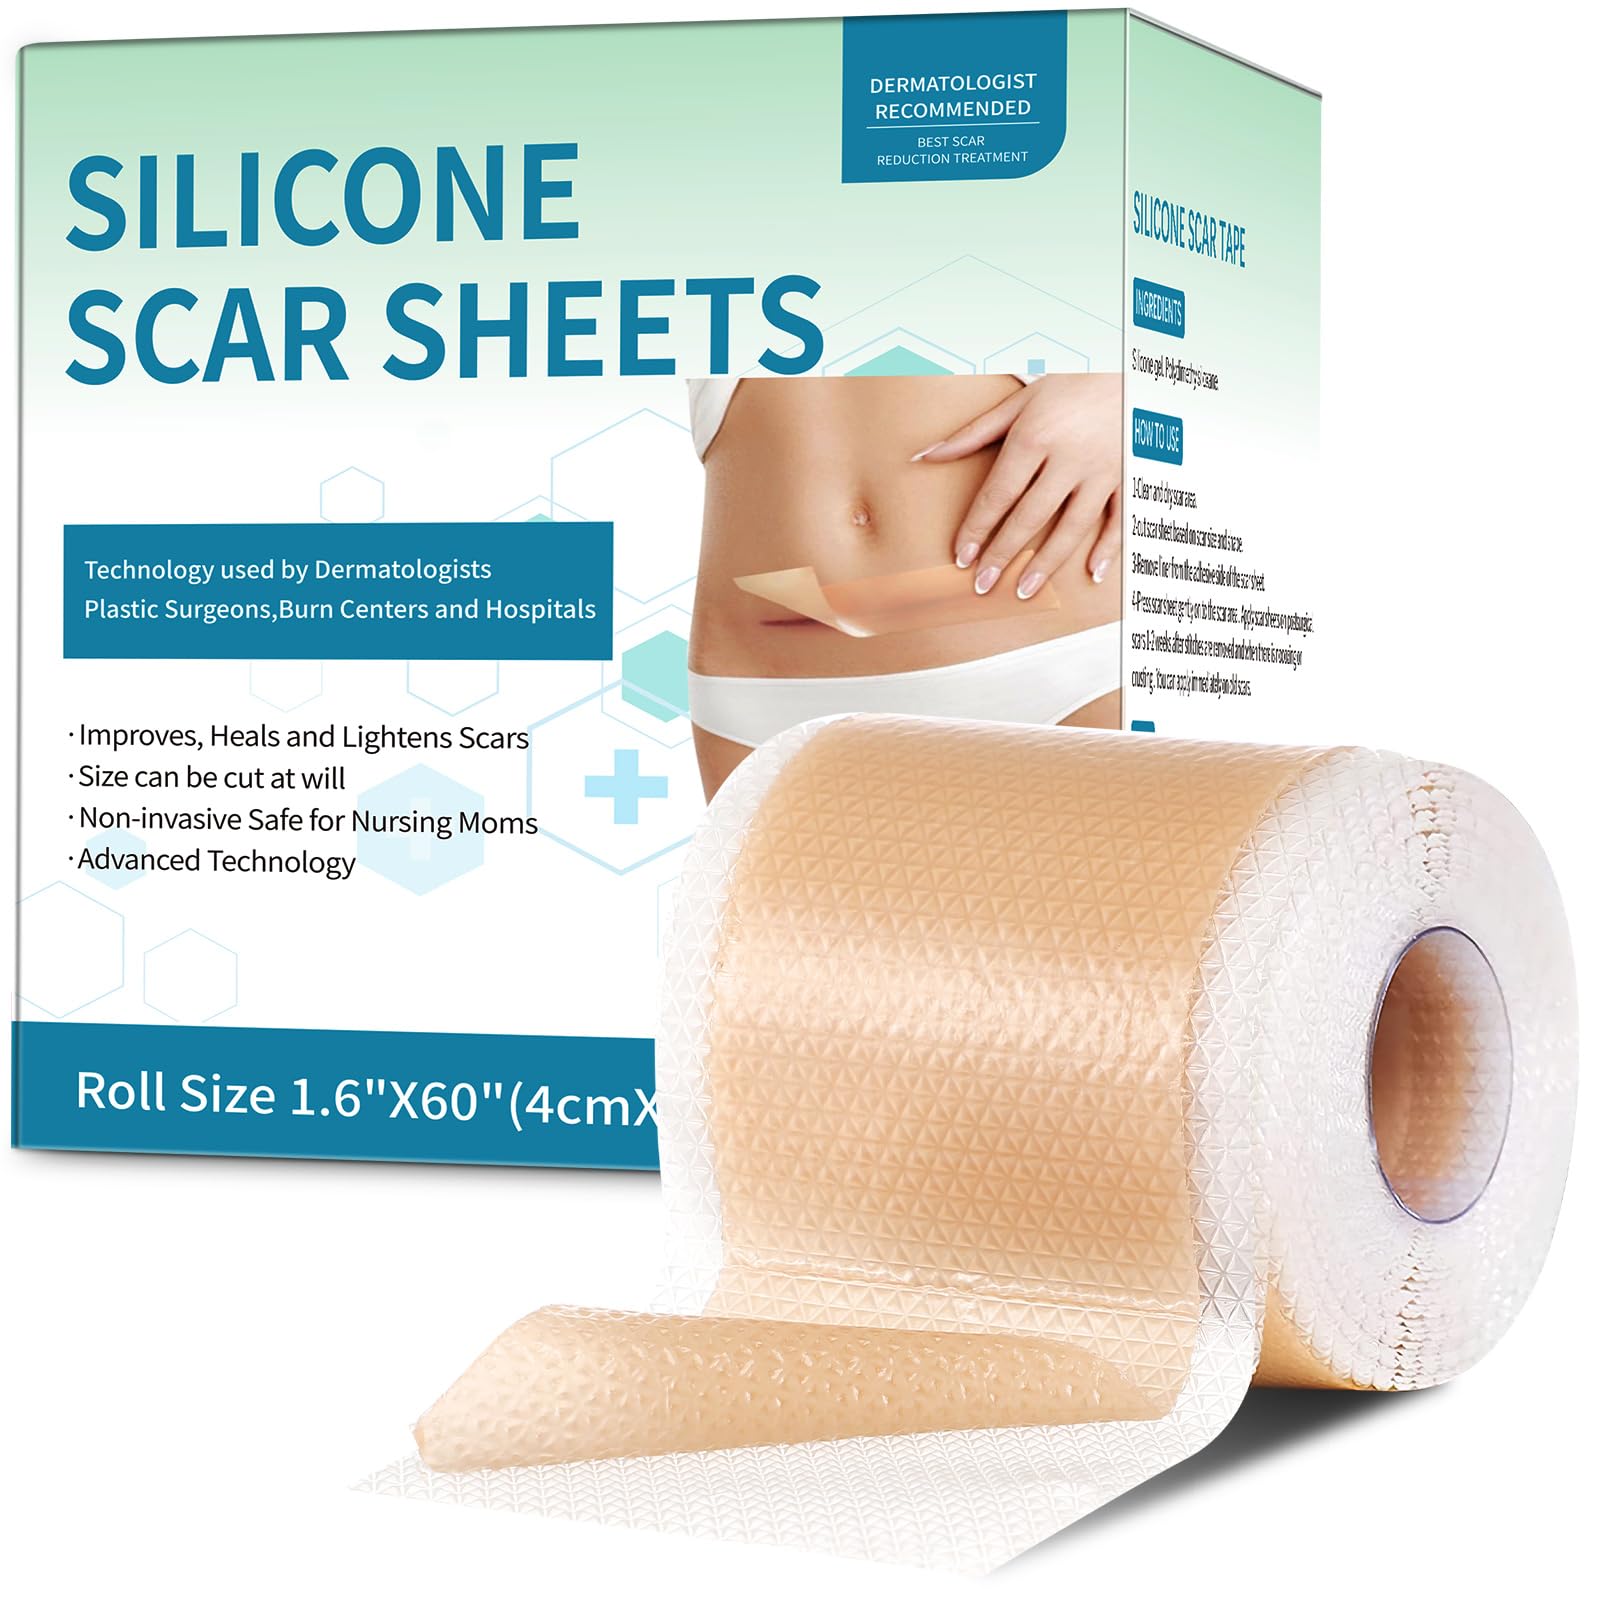 Silicone Scar Sheets, Silicone Scar Tape(1.6”x 60” Roll-1.5M), Silicone Scar Strips, Professional Scar Removal Sheets for Surgical Scars, Keloid, C-Section, Burn et